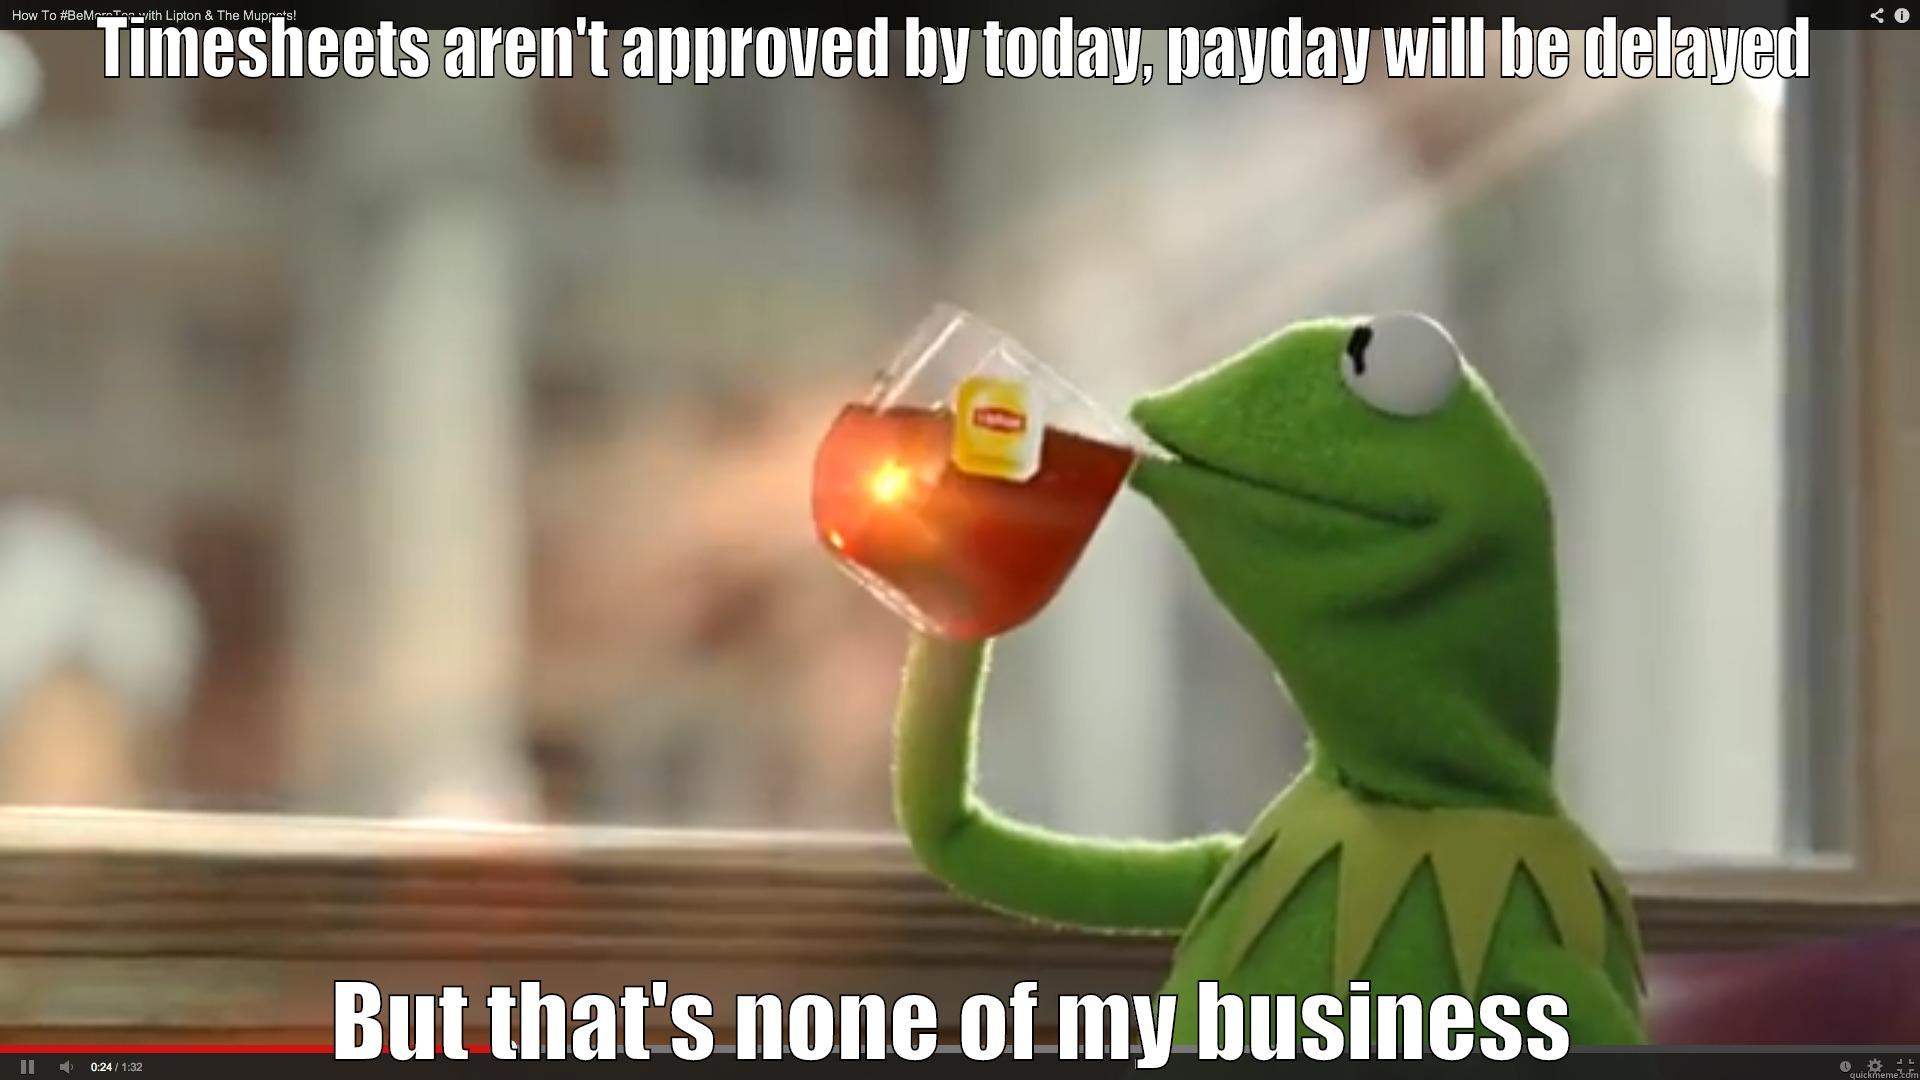 Kermy biz - TIMESHEETS AREN'T APPROVED BY TODAY, PAYDAY WILL BE DELAYED BUT THAT'S NONE OF MY BUSINESS Misc